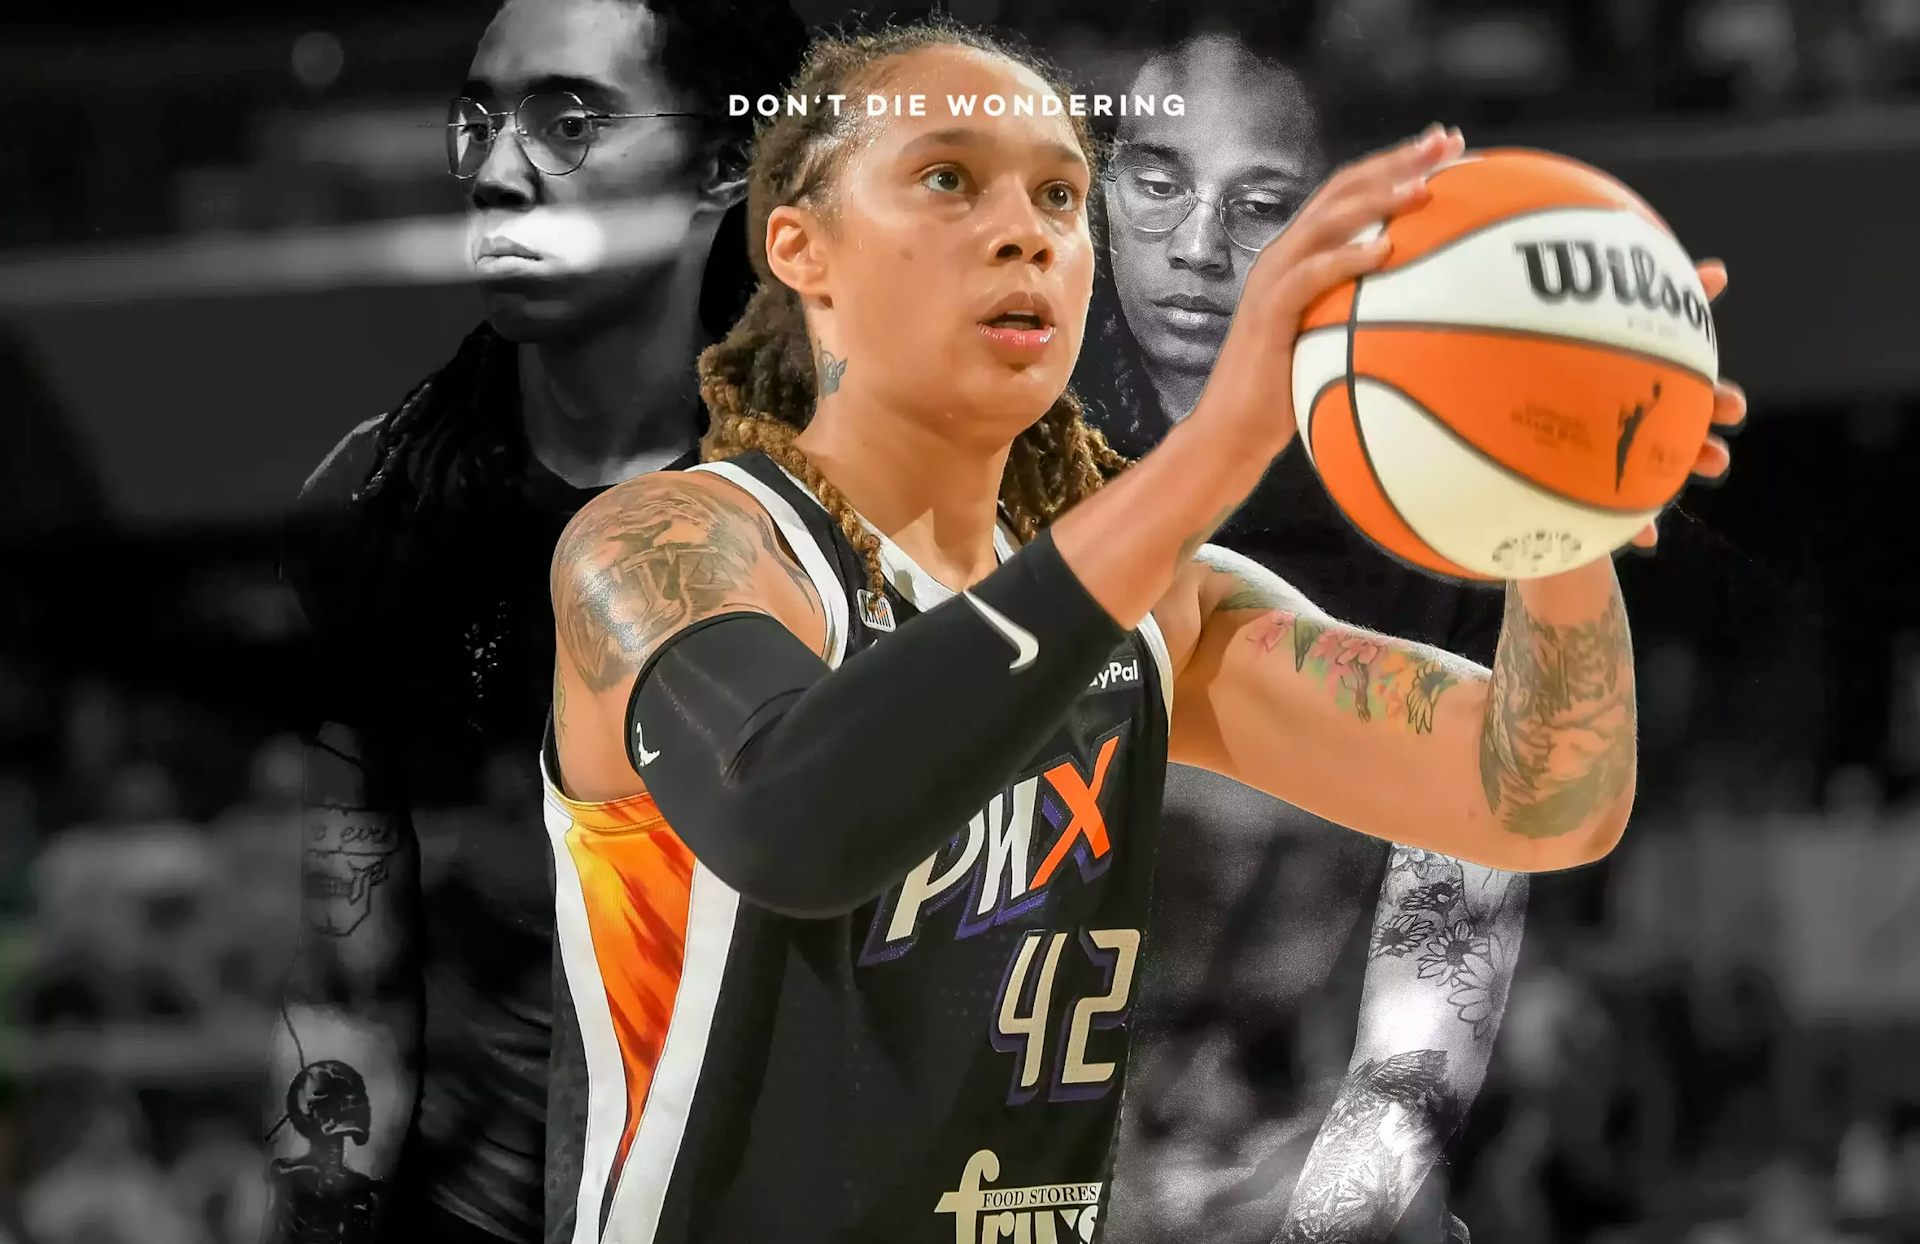 Who is Brittney Griner? The WNBA star sentenced to 9 years for drug smuggling